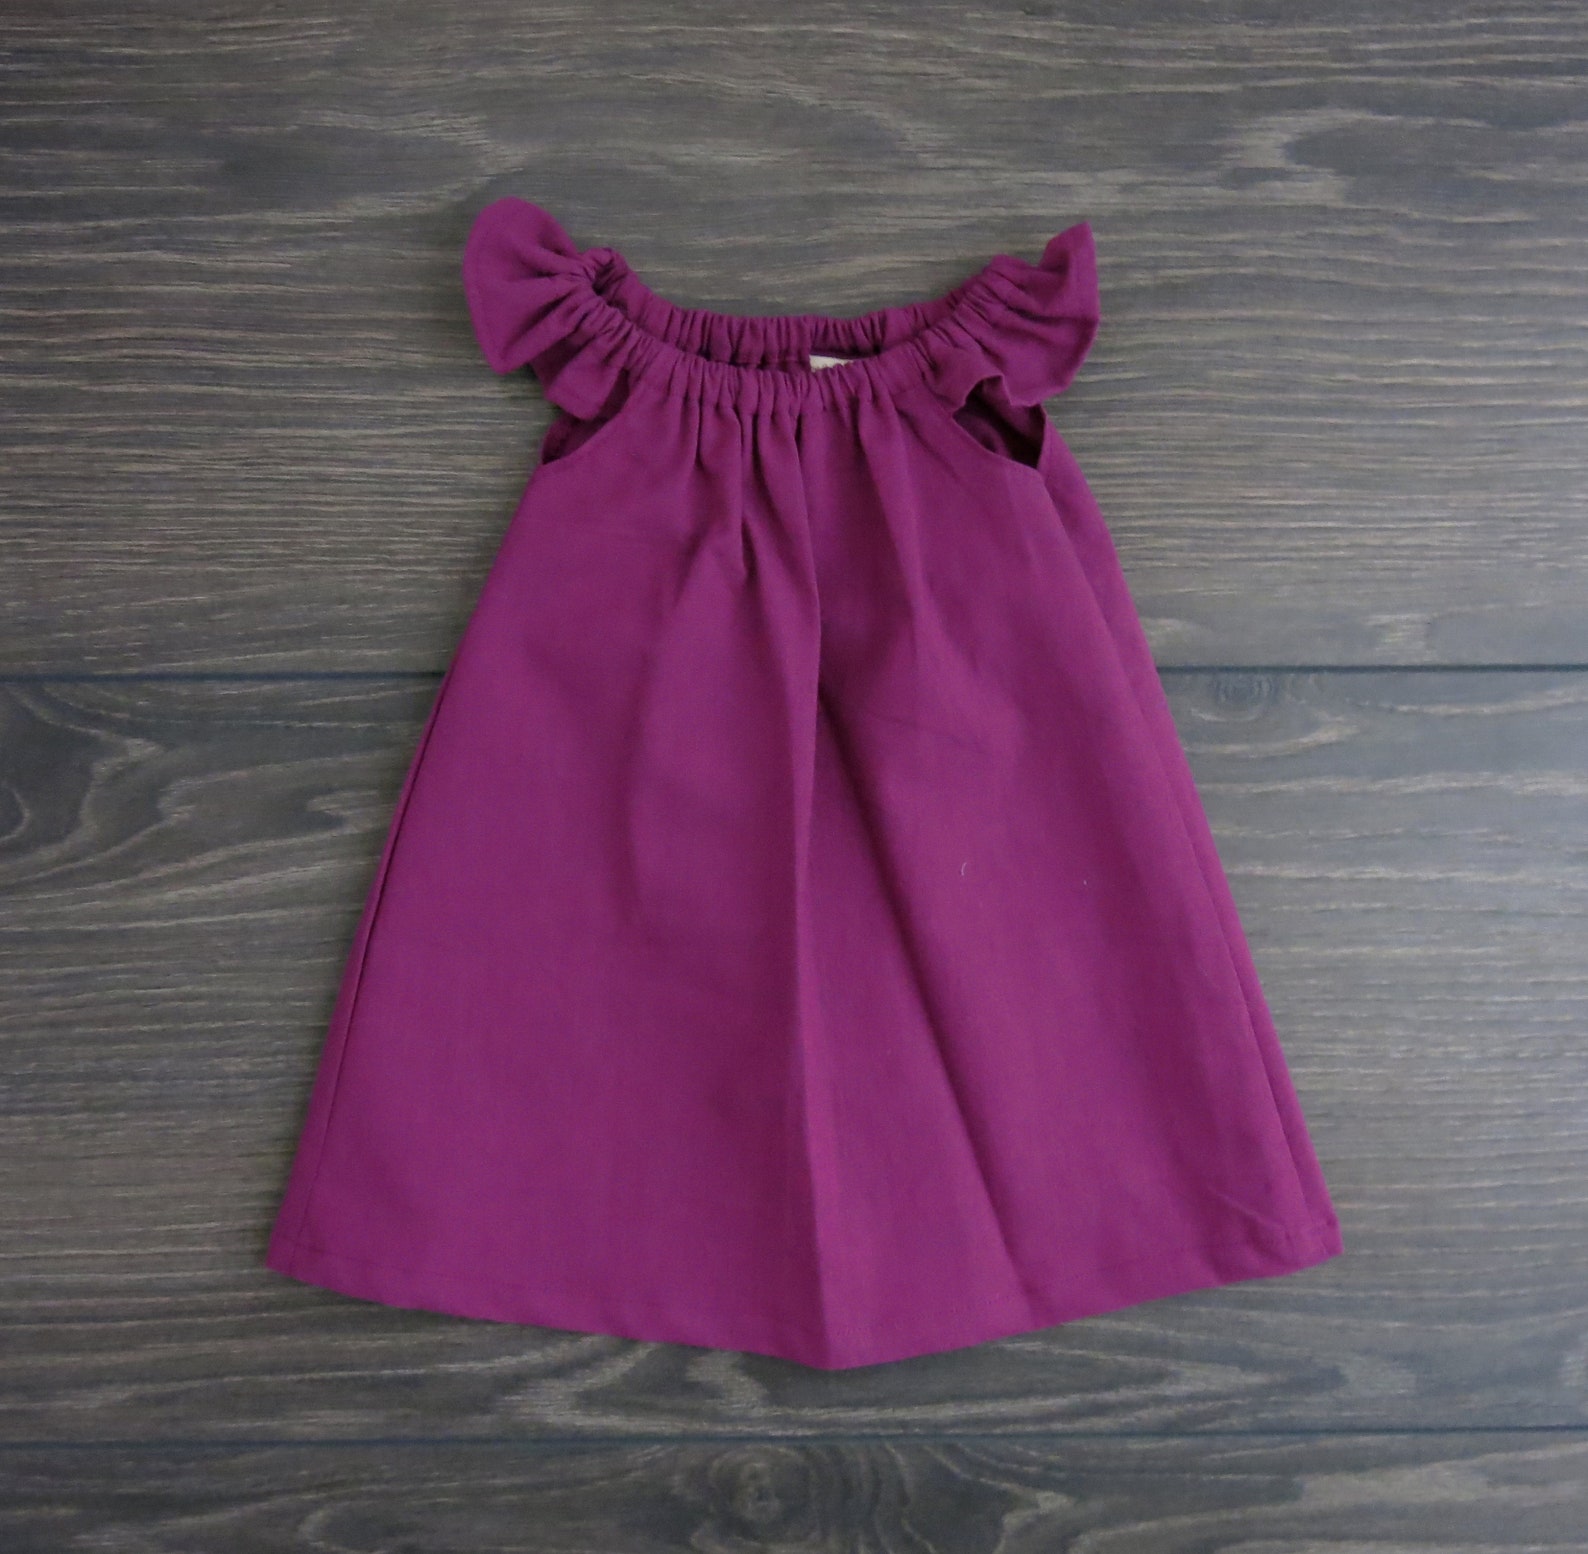 Baby Girl Clothes / Purple Baby Dress / Organic Baby Clothes / - Etsy